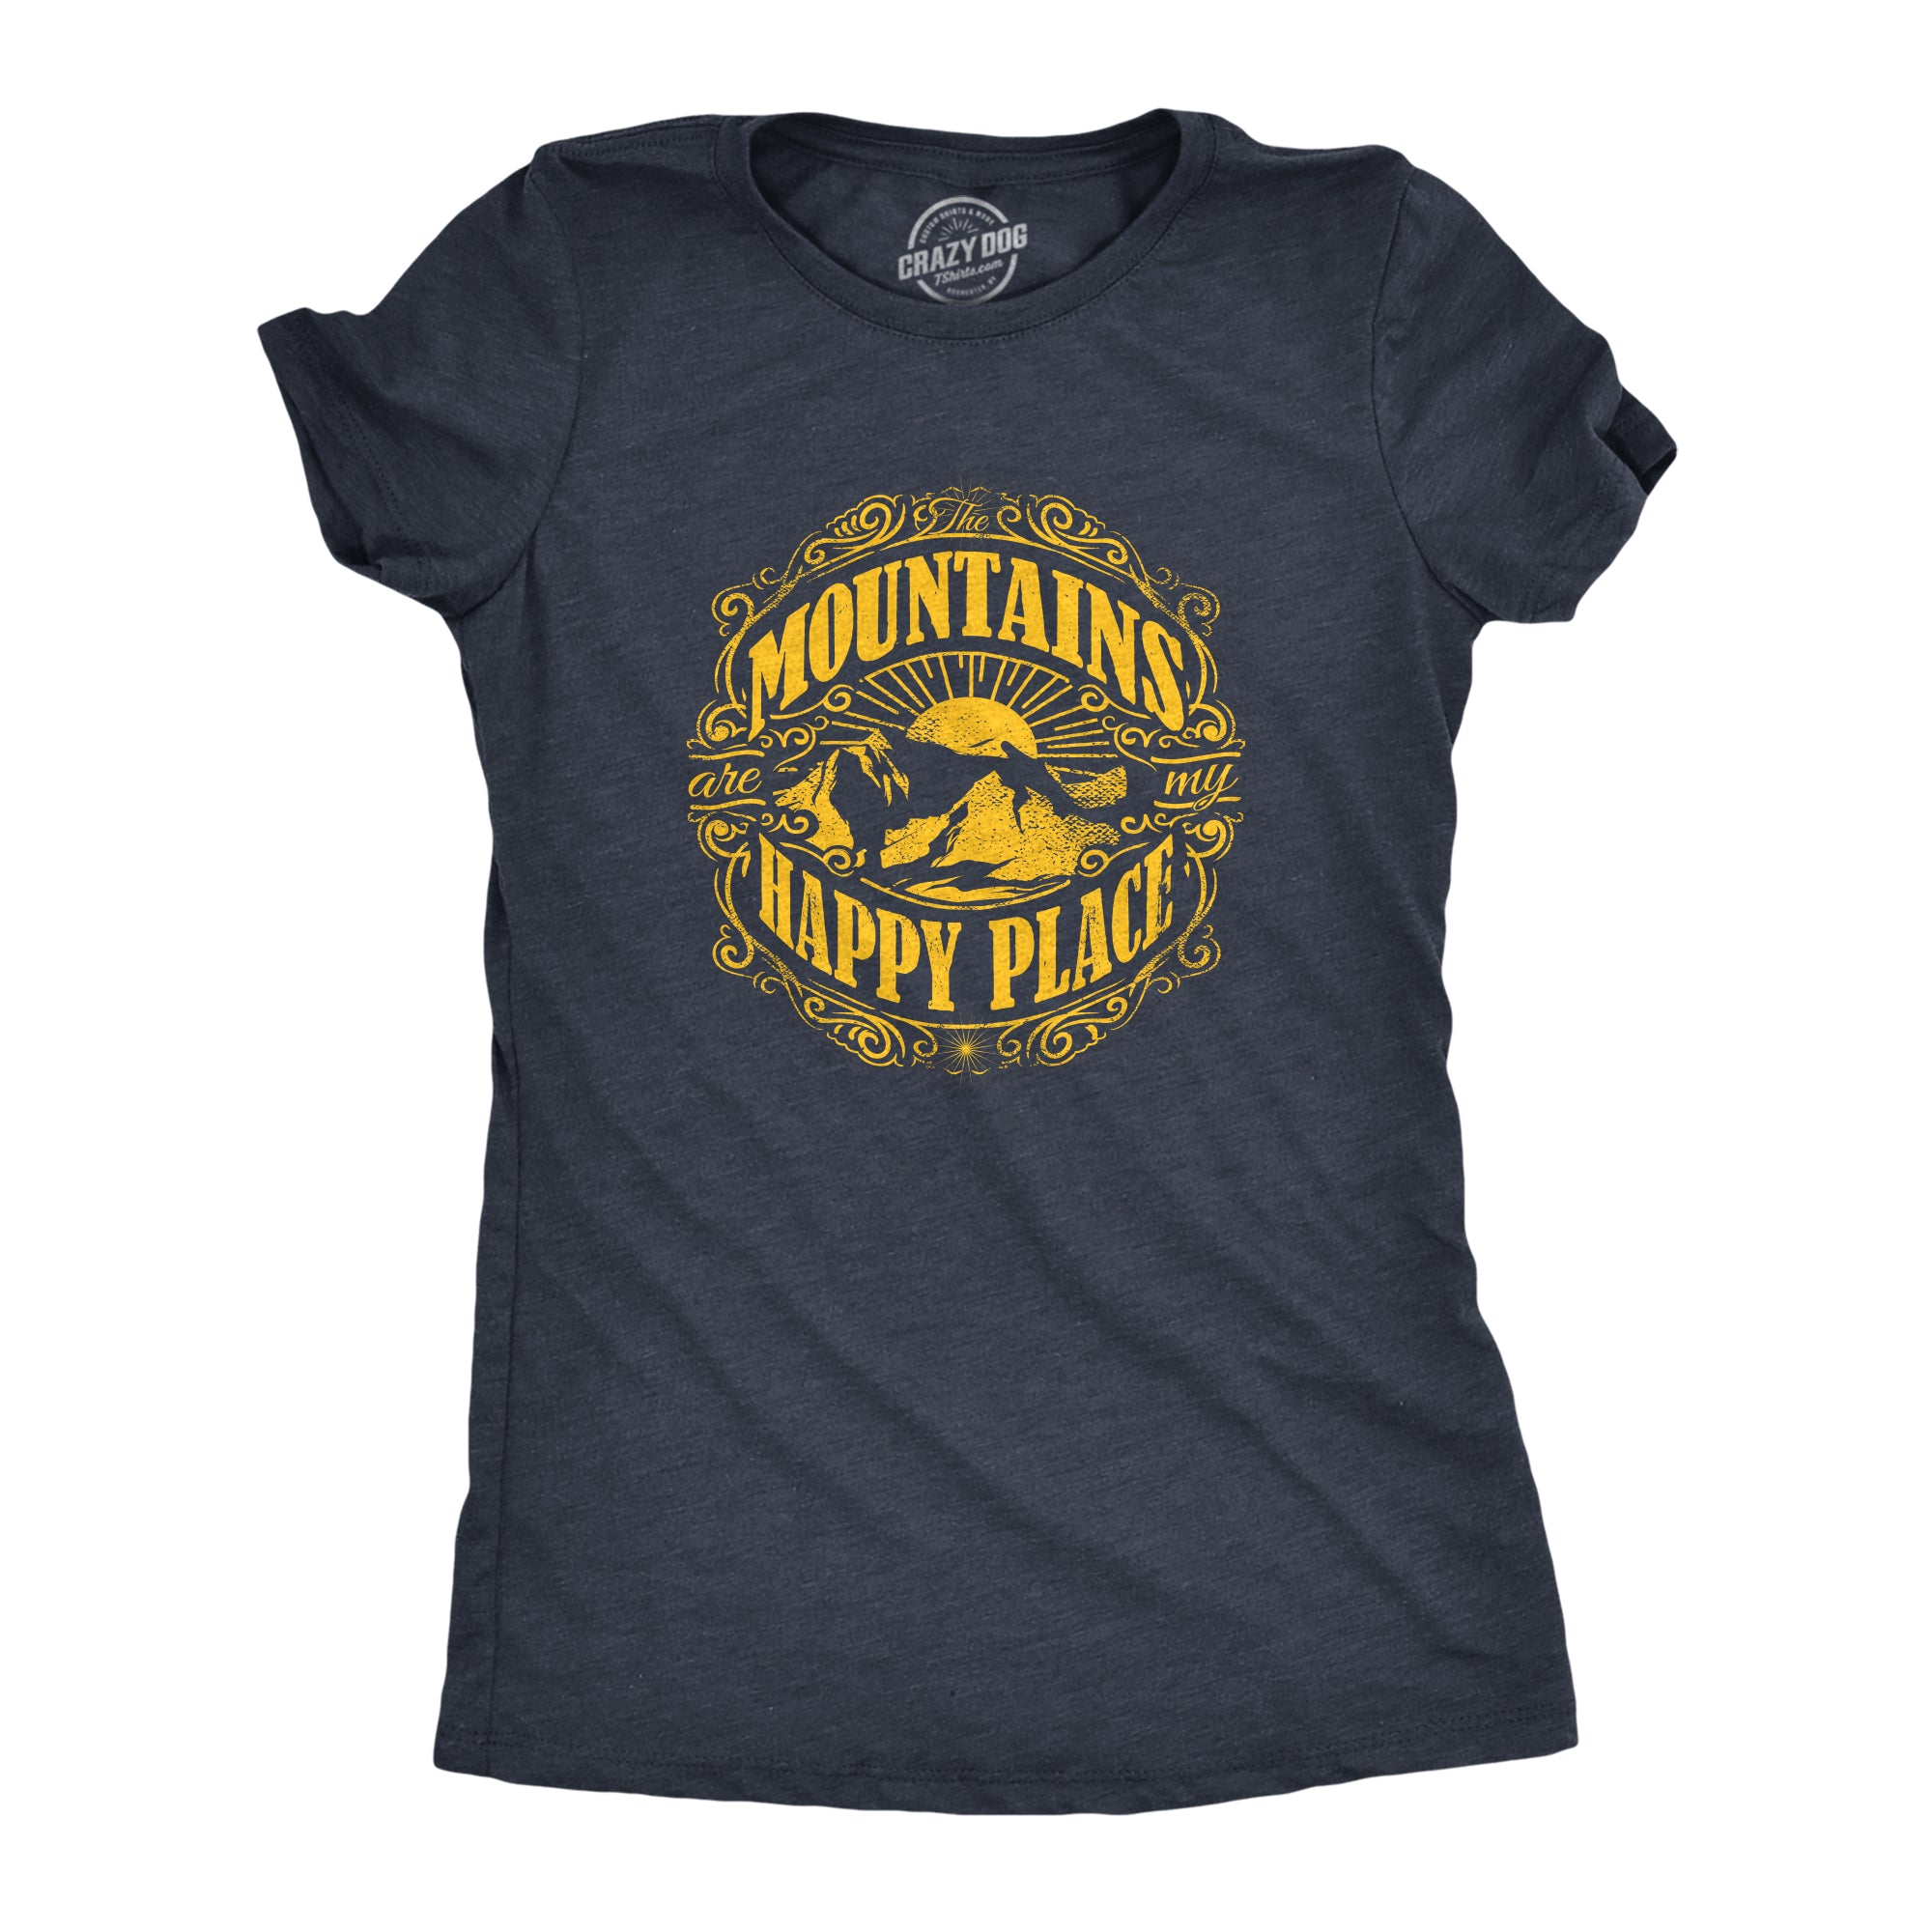 Mens Mountains Are My Happy Place Cool Vintage Rockies Outdoor Nature T Shirt (Navy) S